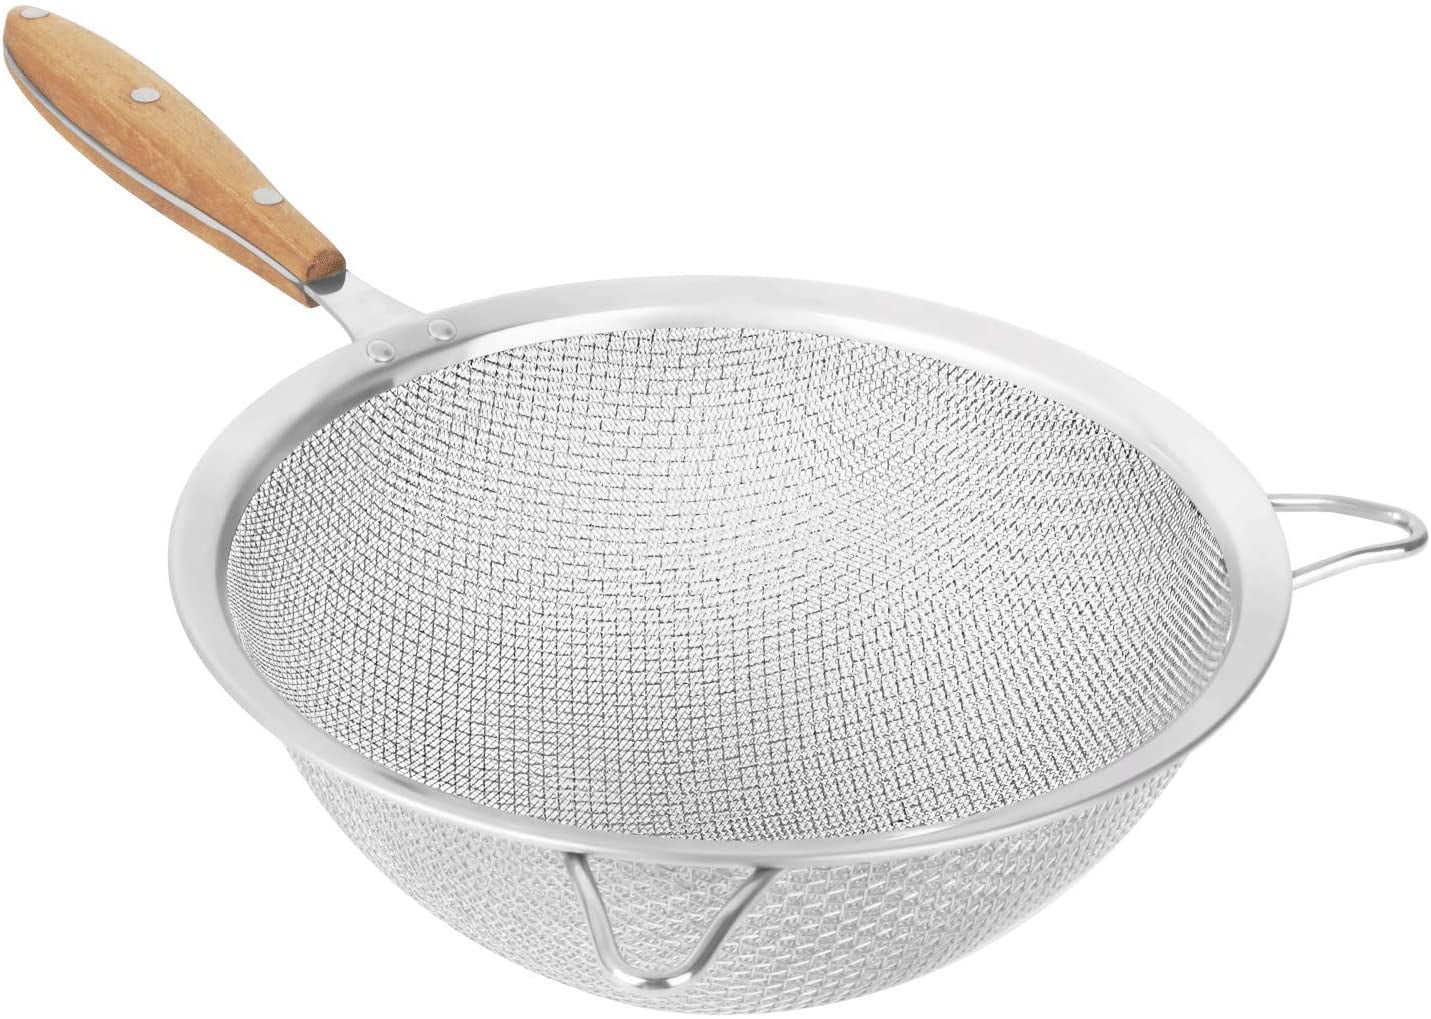 Designed for Chefs and Kitchen 9 Inch Fine Mesh Strainer with 9 Inch Large Stainless Steel Double Fine Mesh and Reinforced Frame and Comfortable Wooden Handle Grip